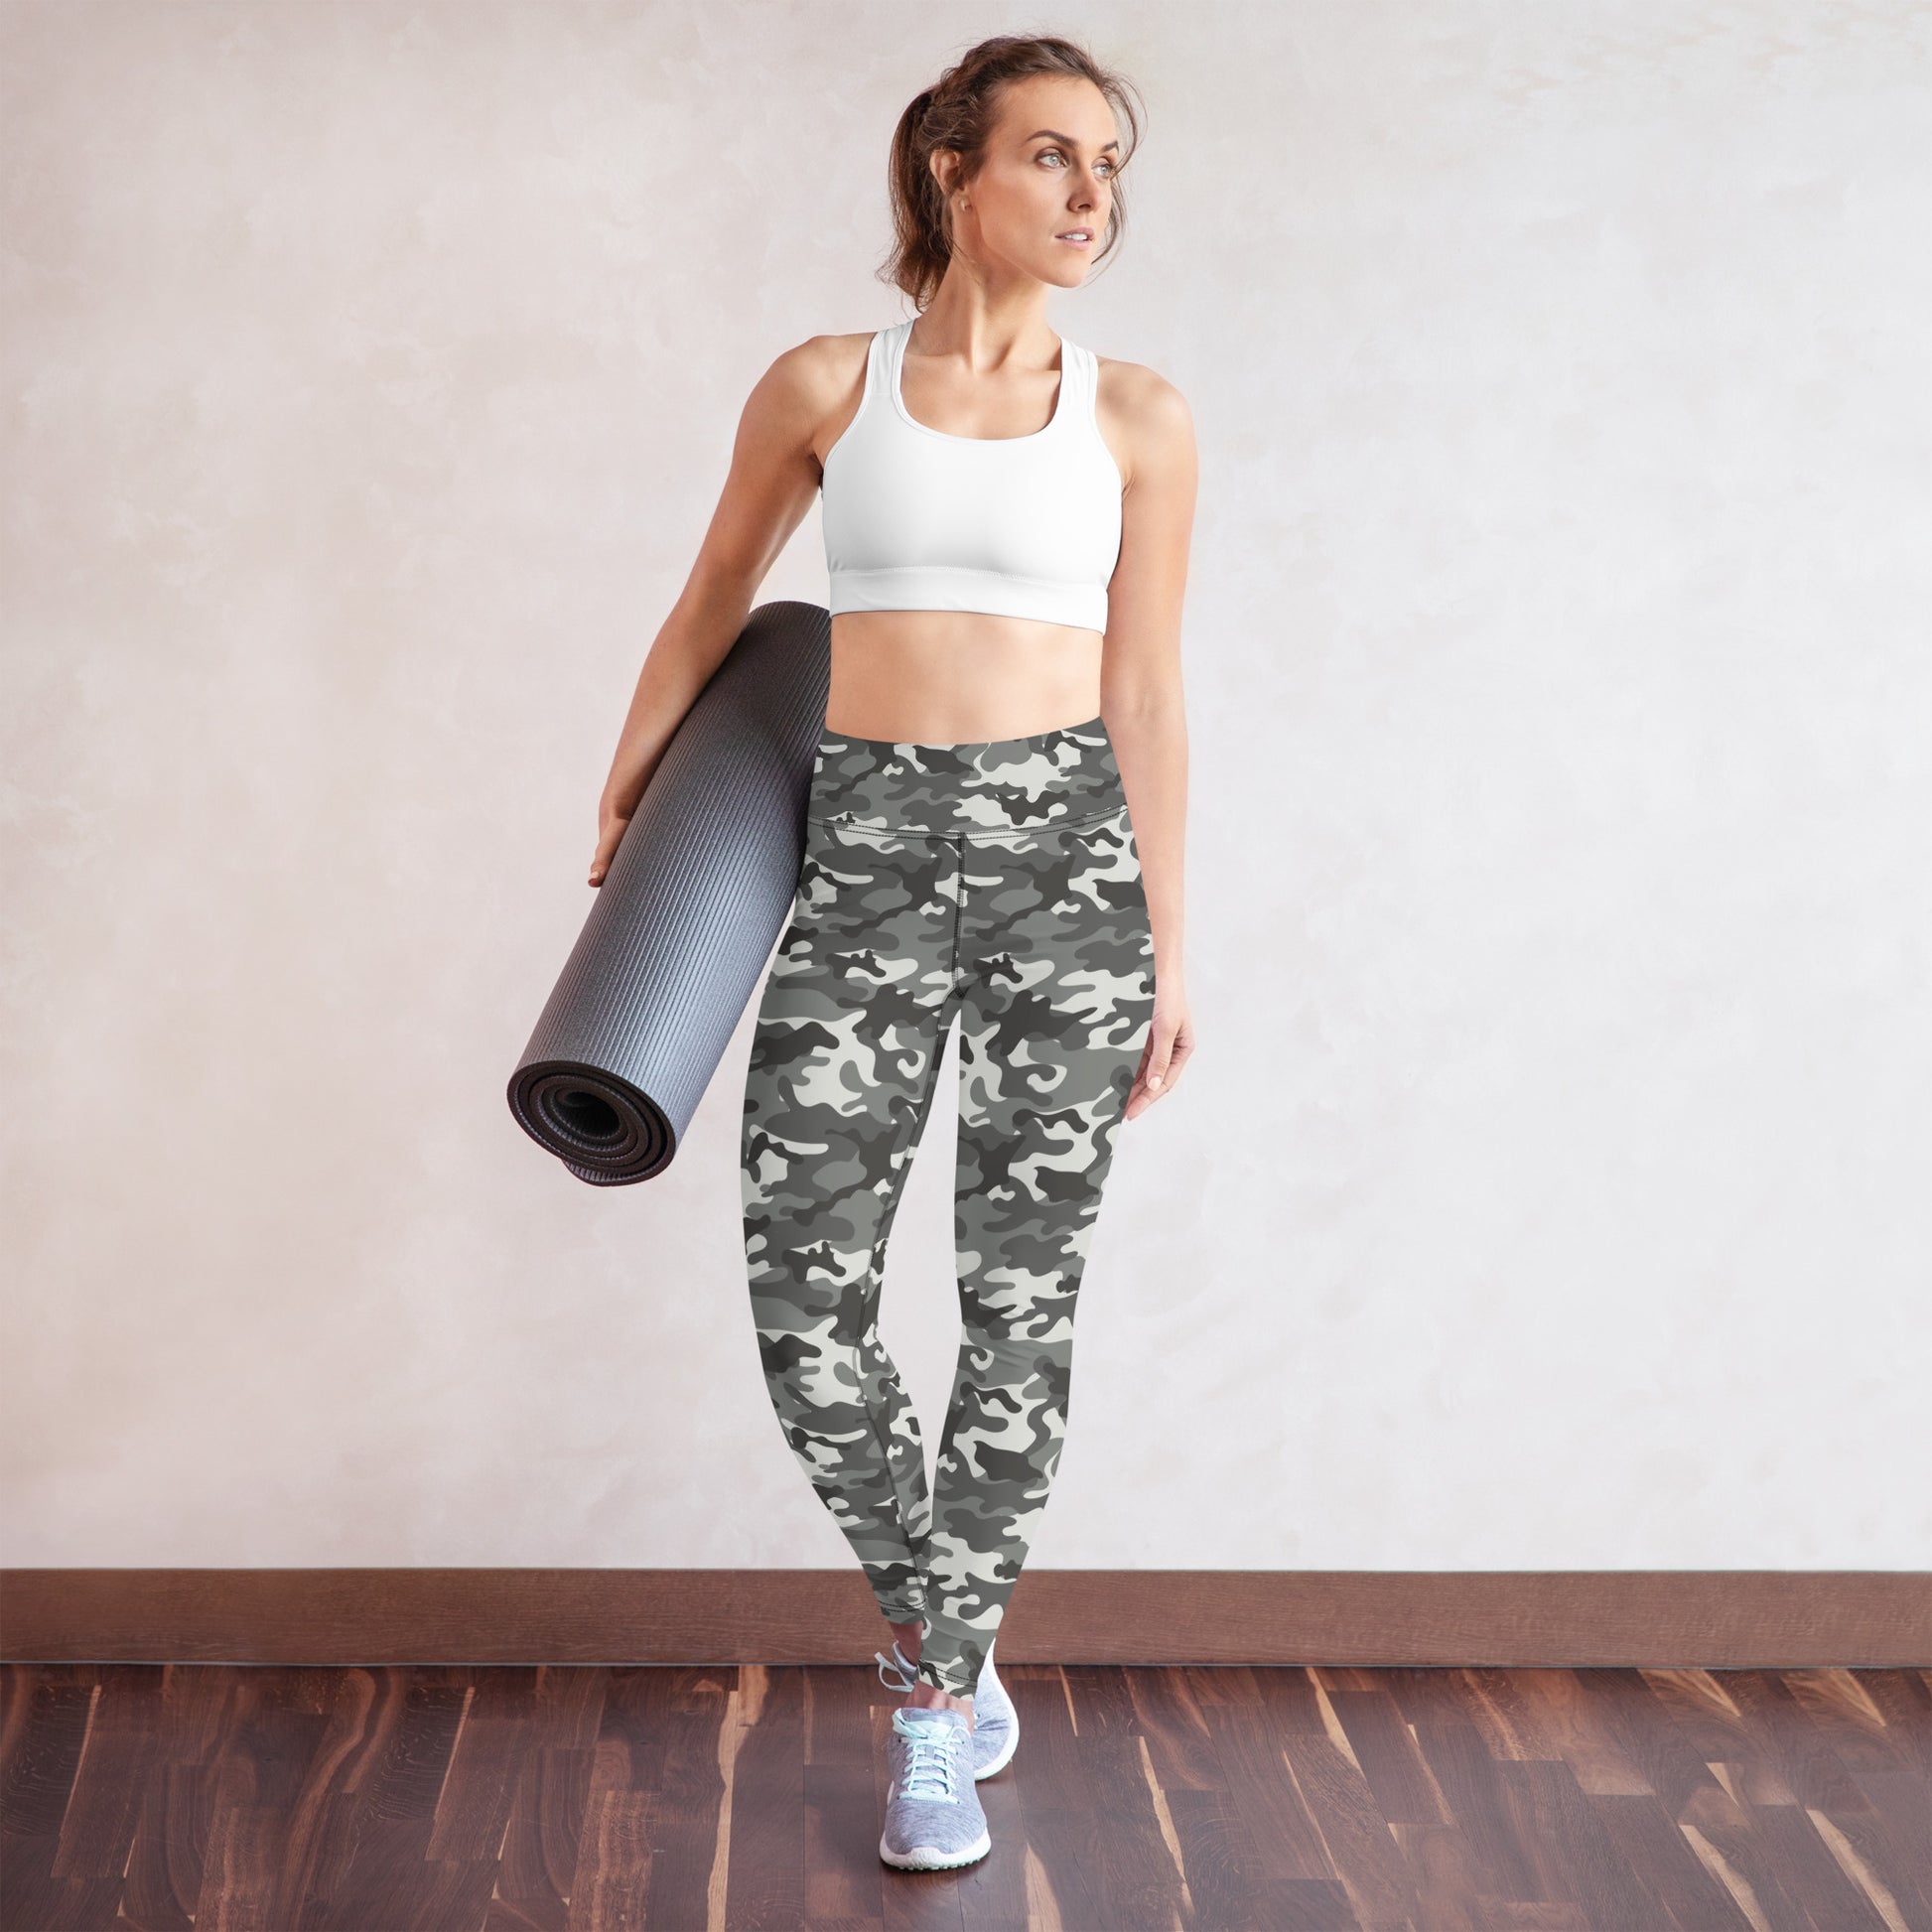 Grey Camo Yoga Leggings Women, Camouflage High Waisted Pants Cute Printed Workout Running Gym Designer Tights Starcove Fashion